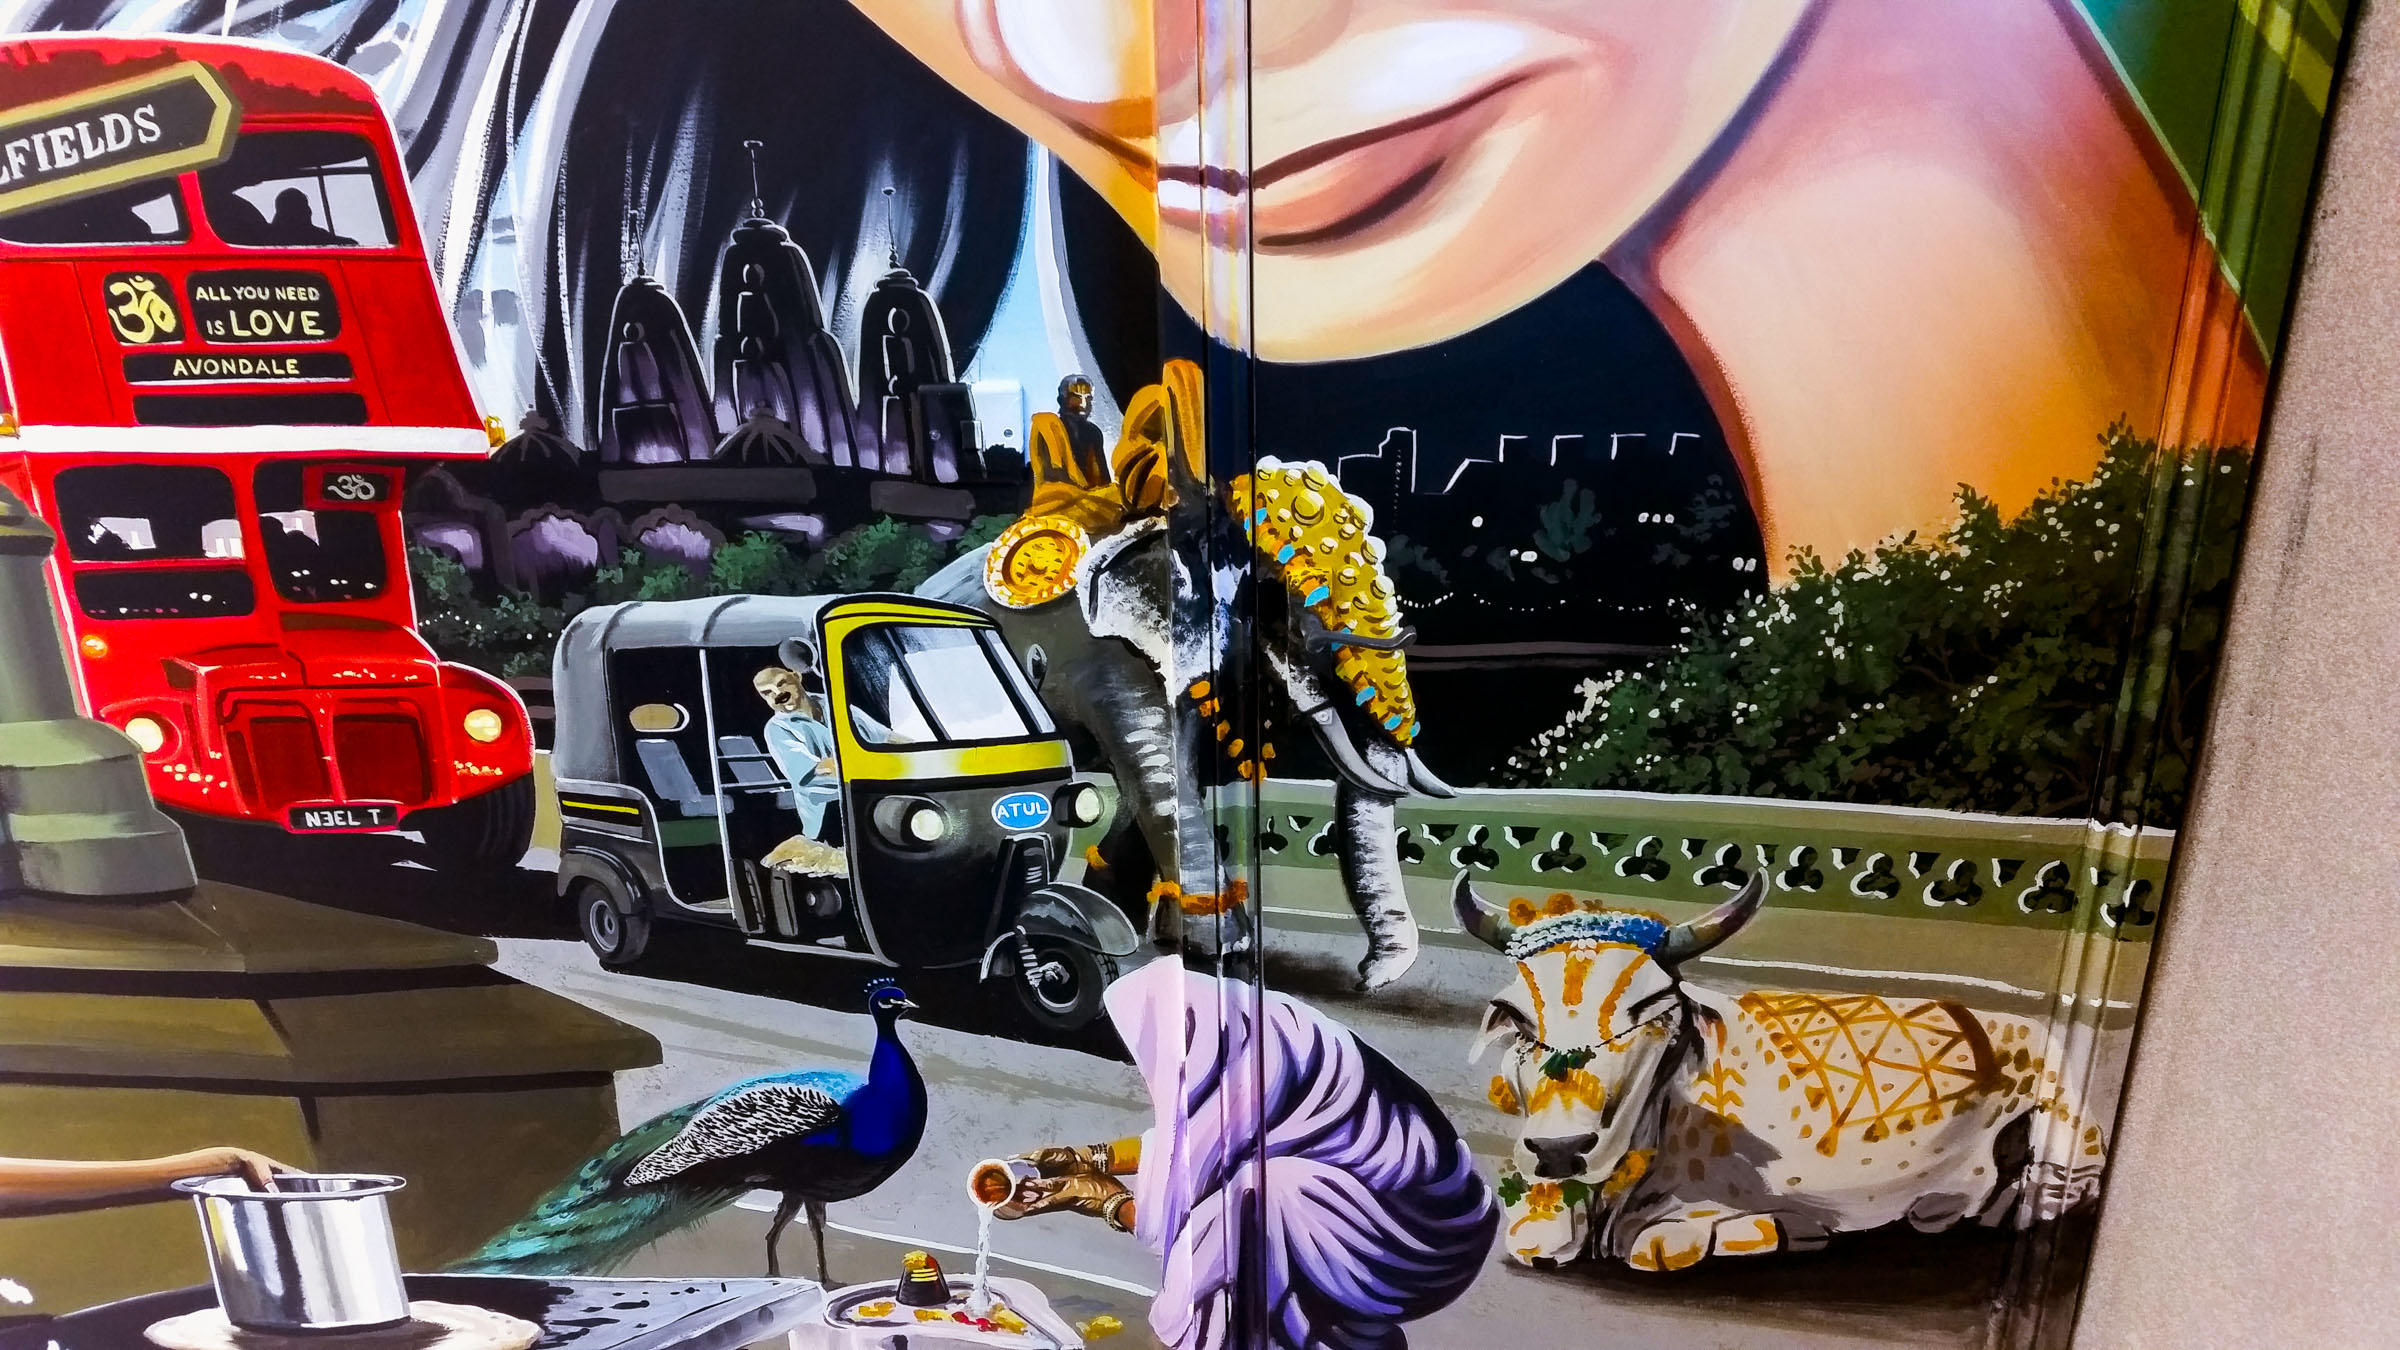 This part of the mural shows the organised chaos of an Indian street scene happening in the middle of London